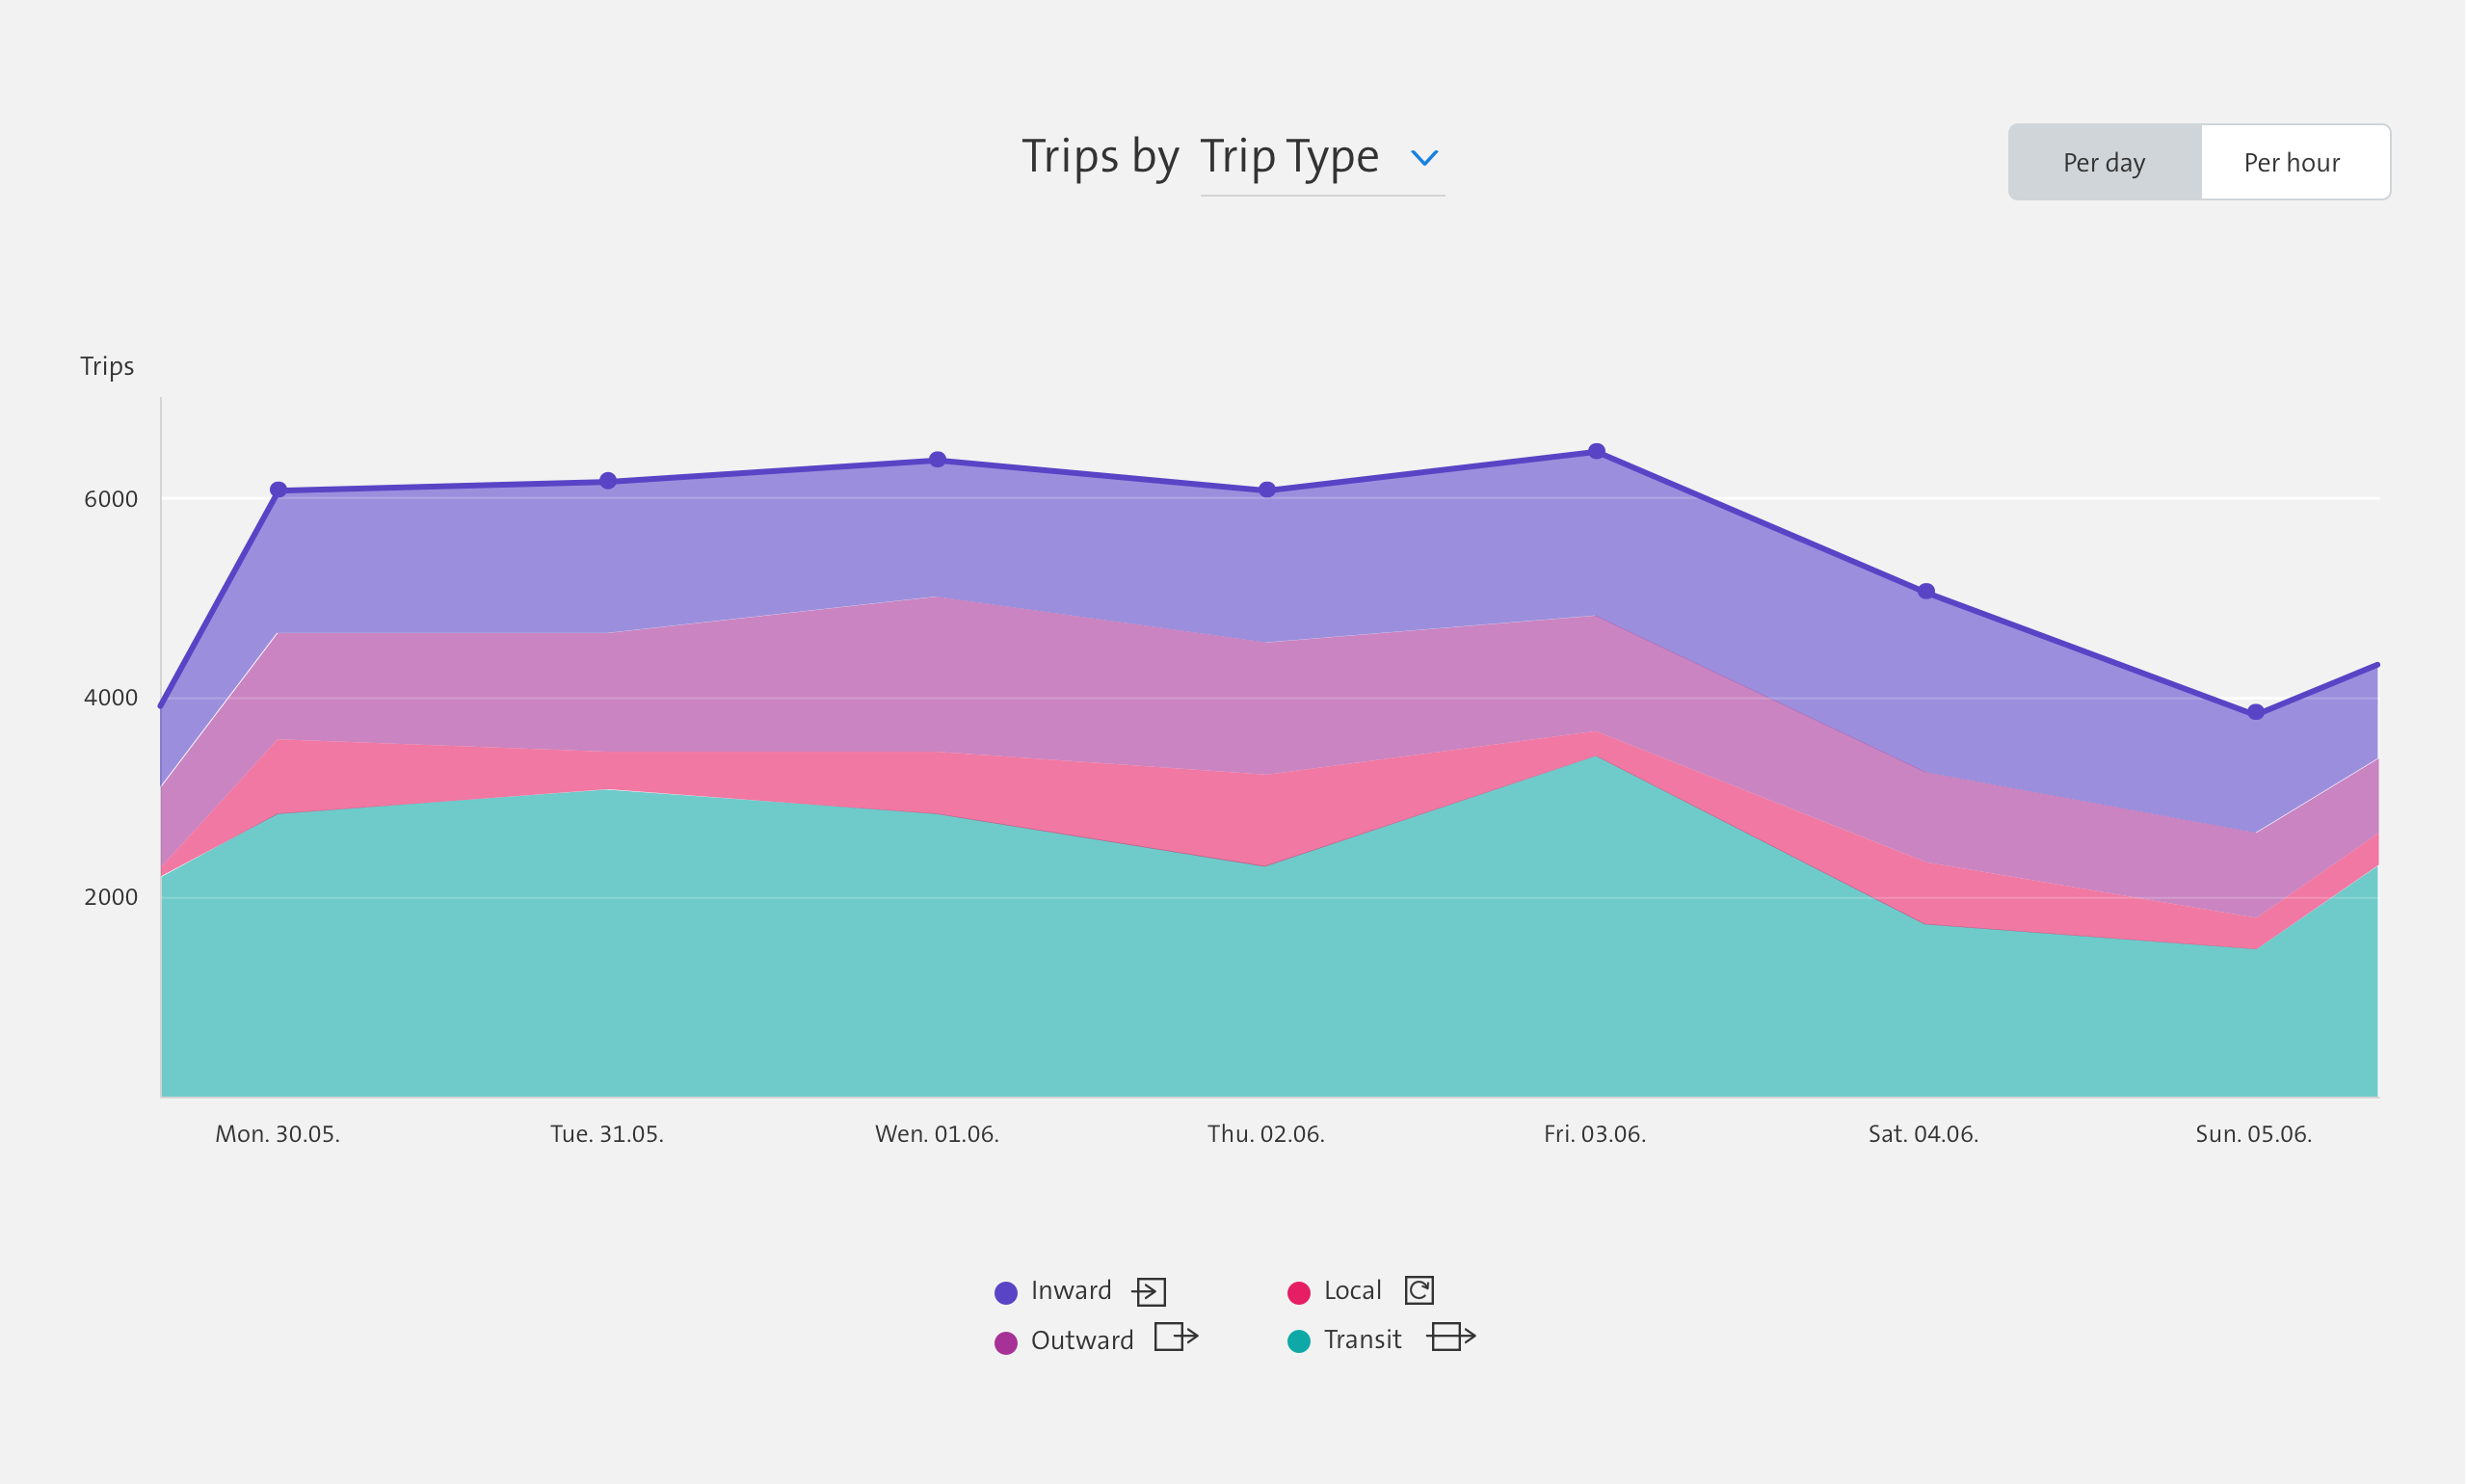 Trips by trip type